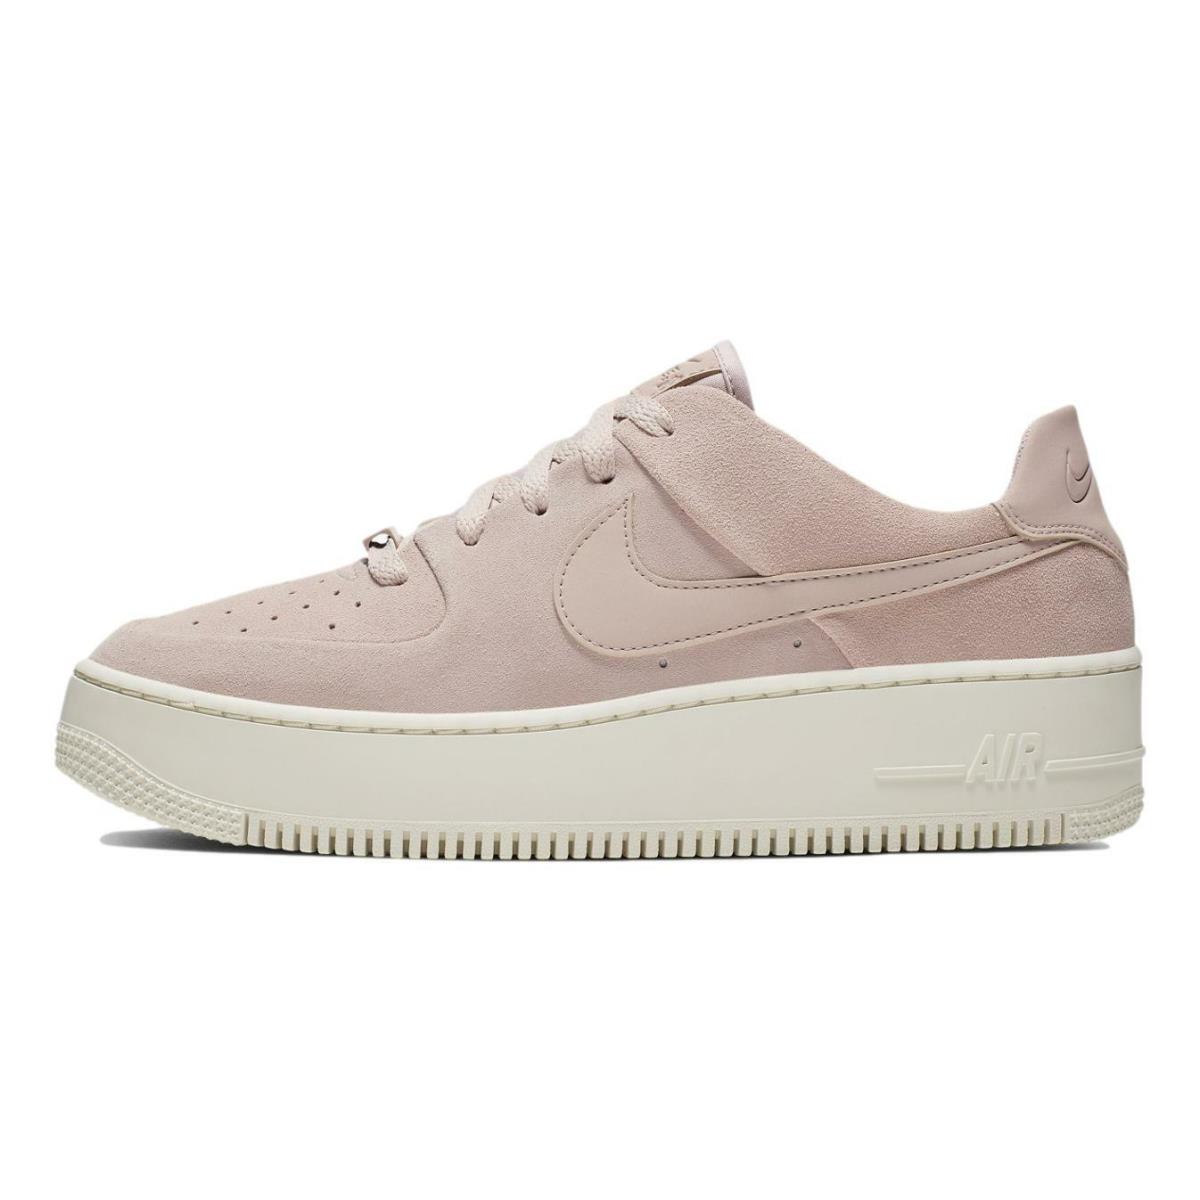 Nike shoes Sage Low - Particle Beige 0